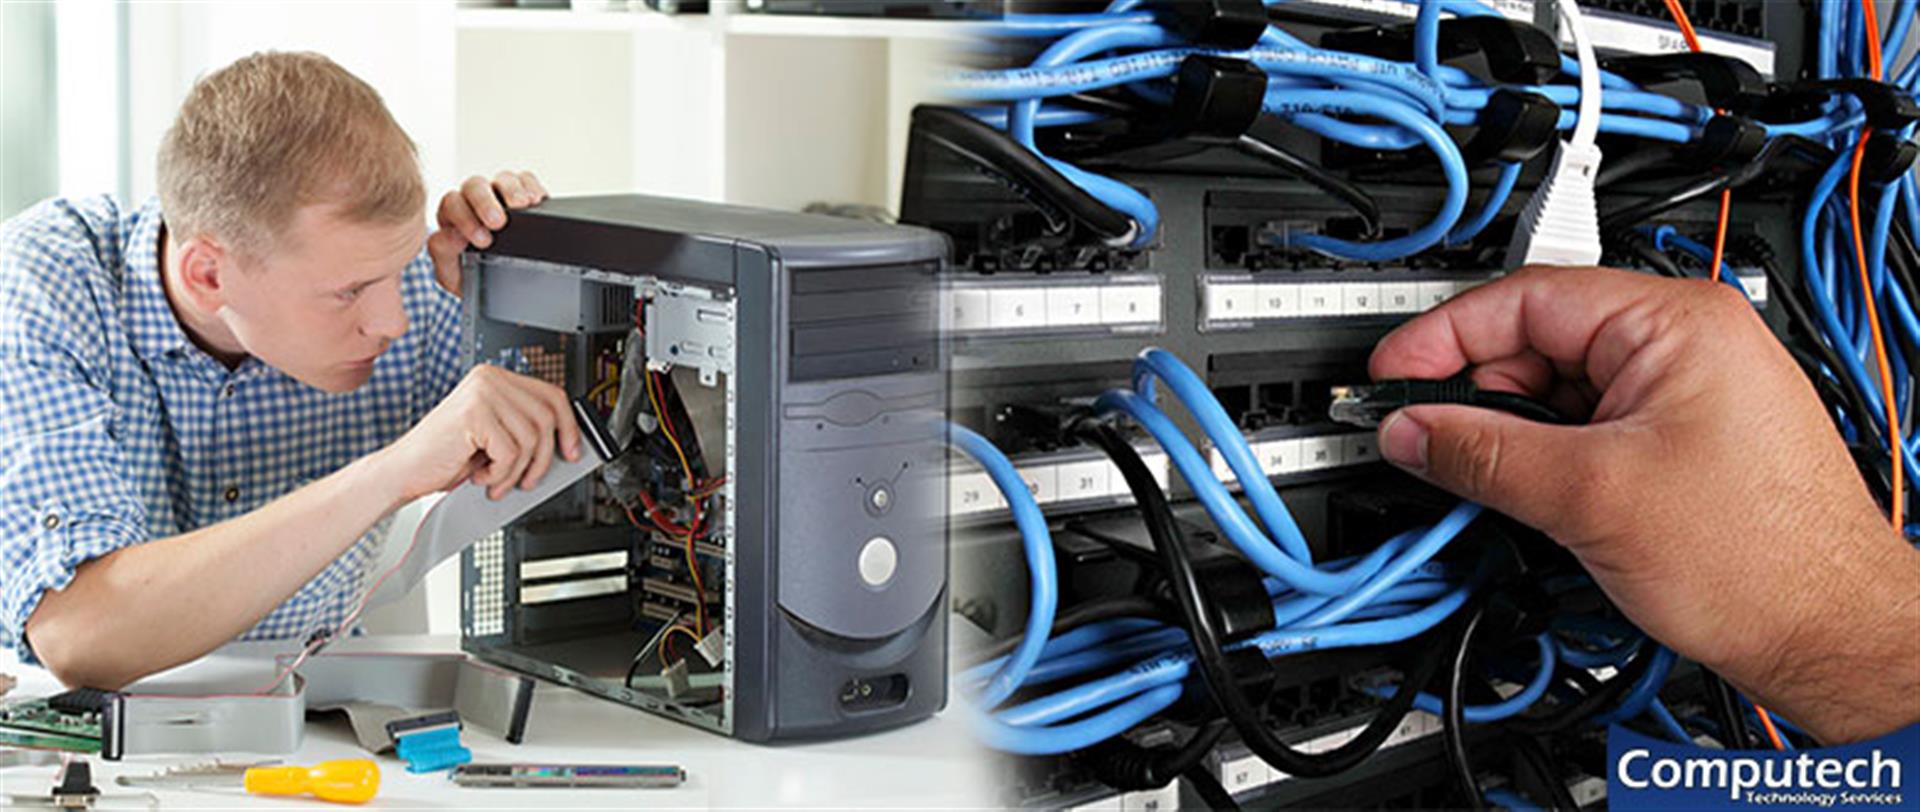 Brewton Alabama Onsite Computer PC & Printer Repair, Networks, Voice & Data Low Voltage Cabling Services